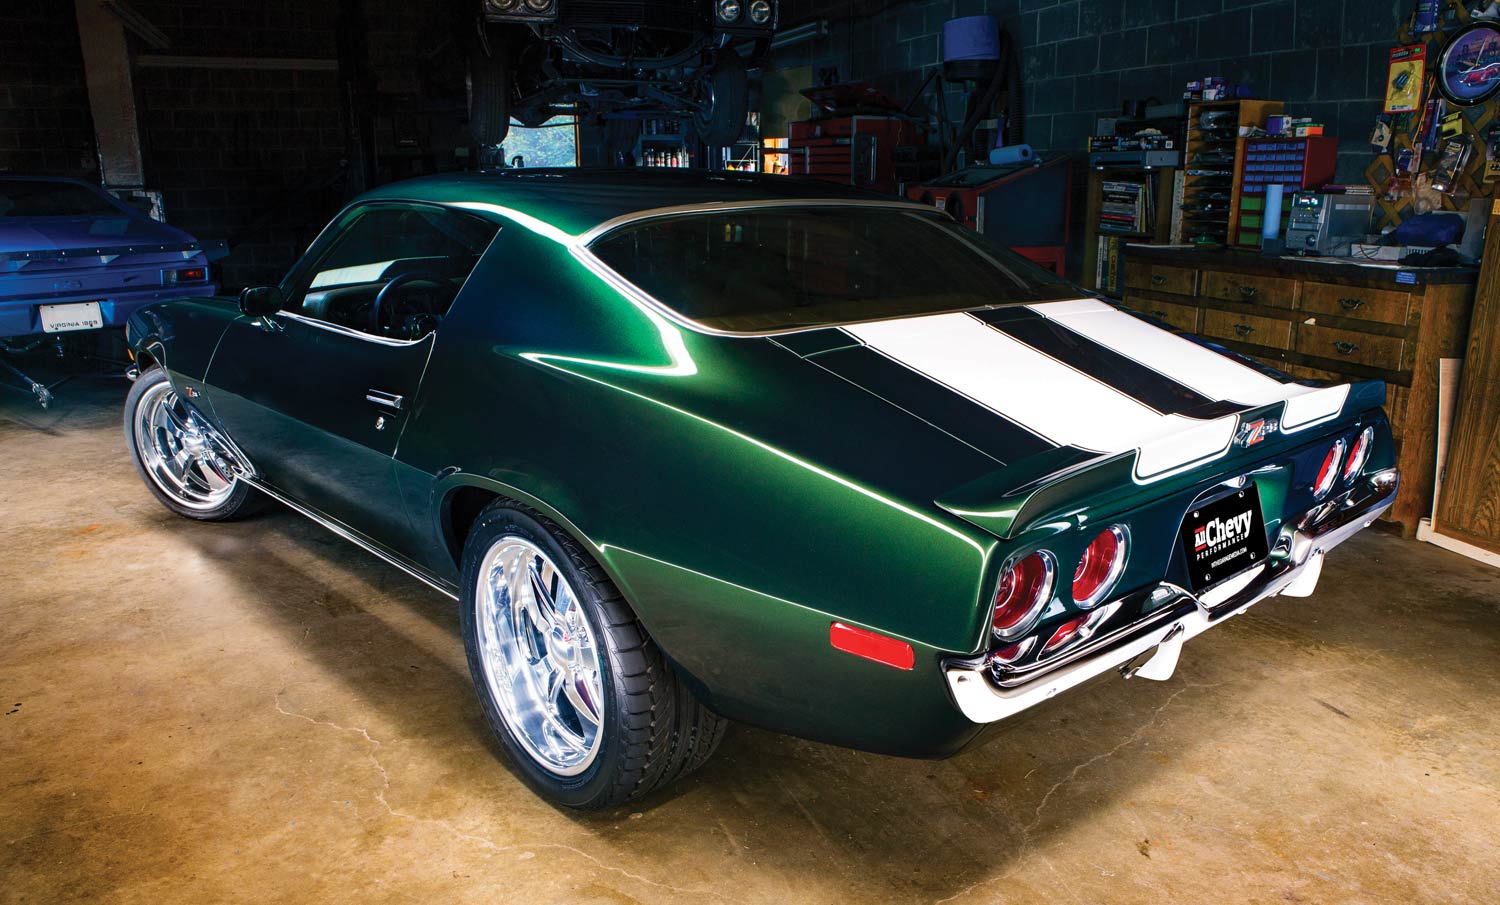 rear passenger side of a green '71 Camaro with white stripes parked in a garage